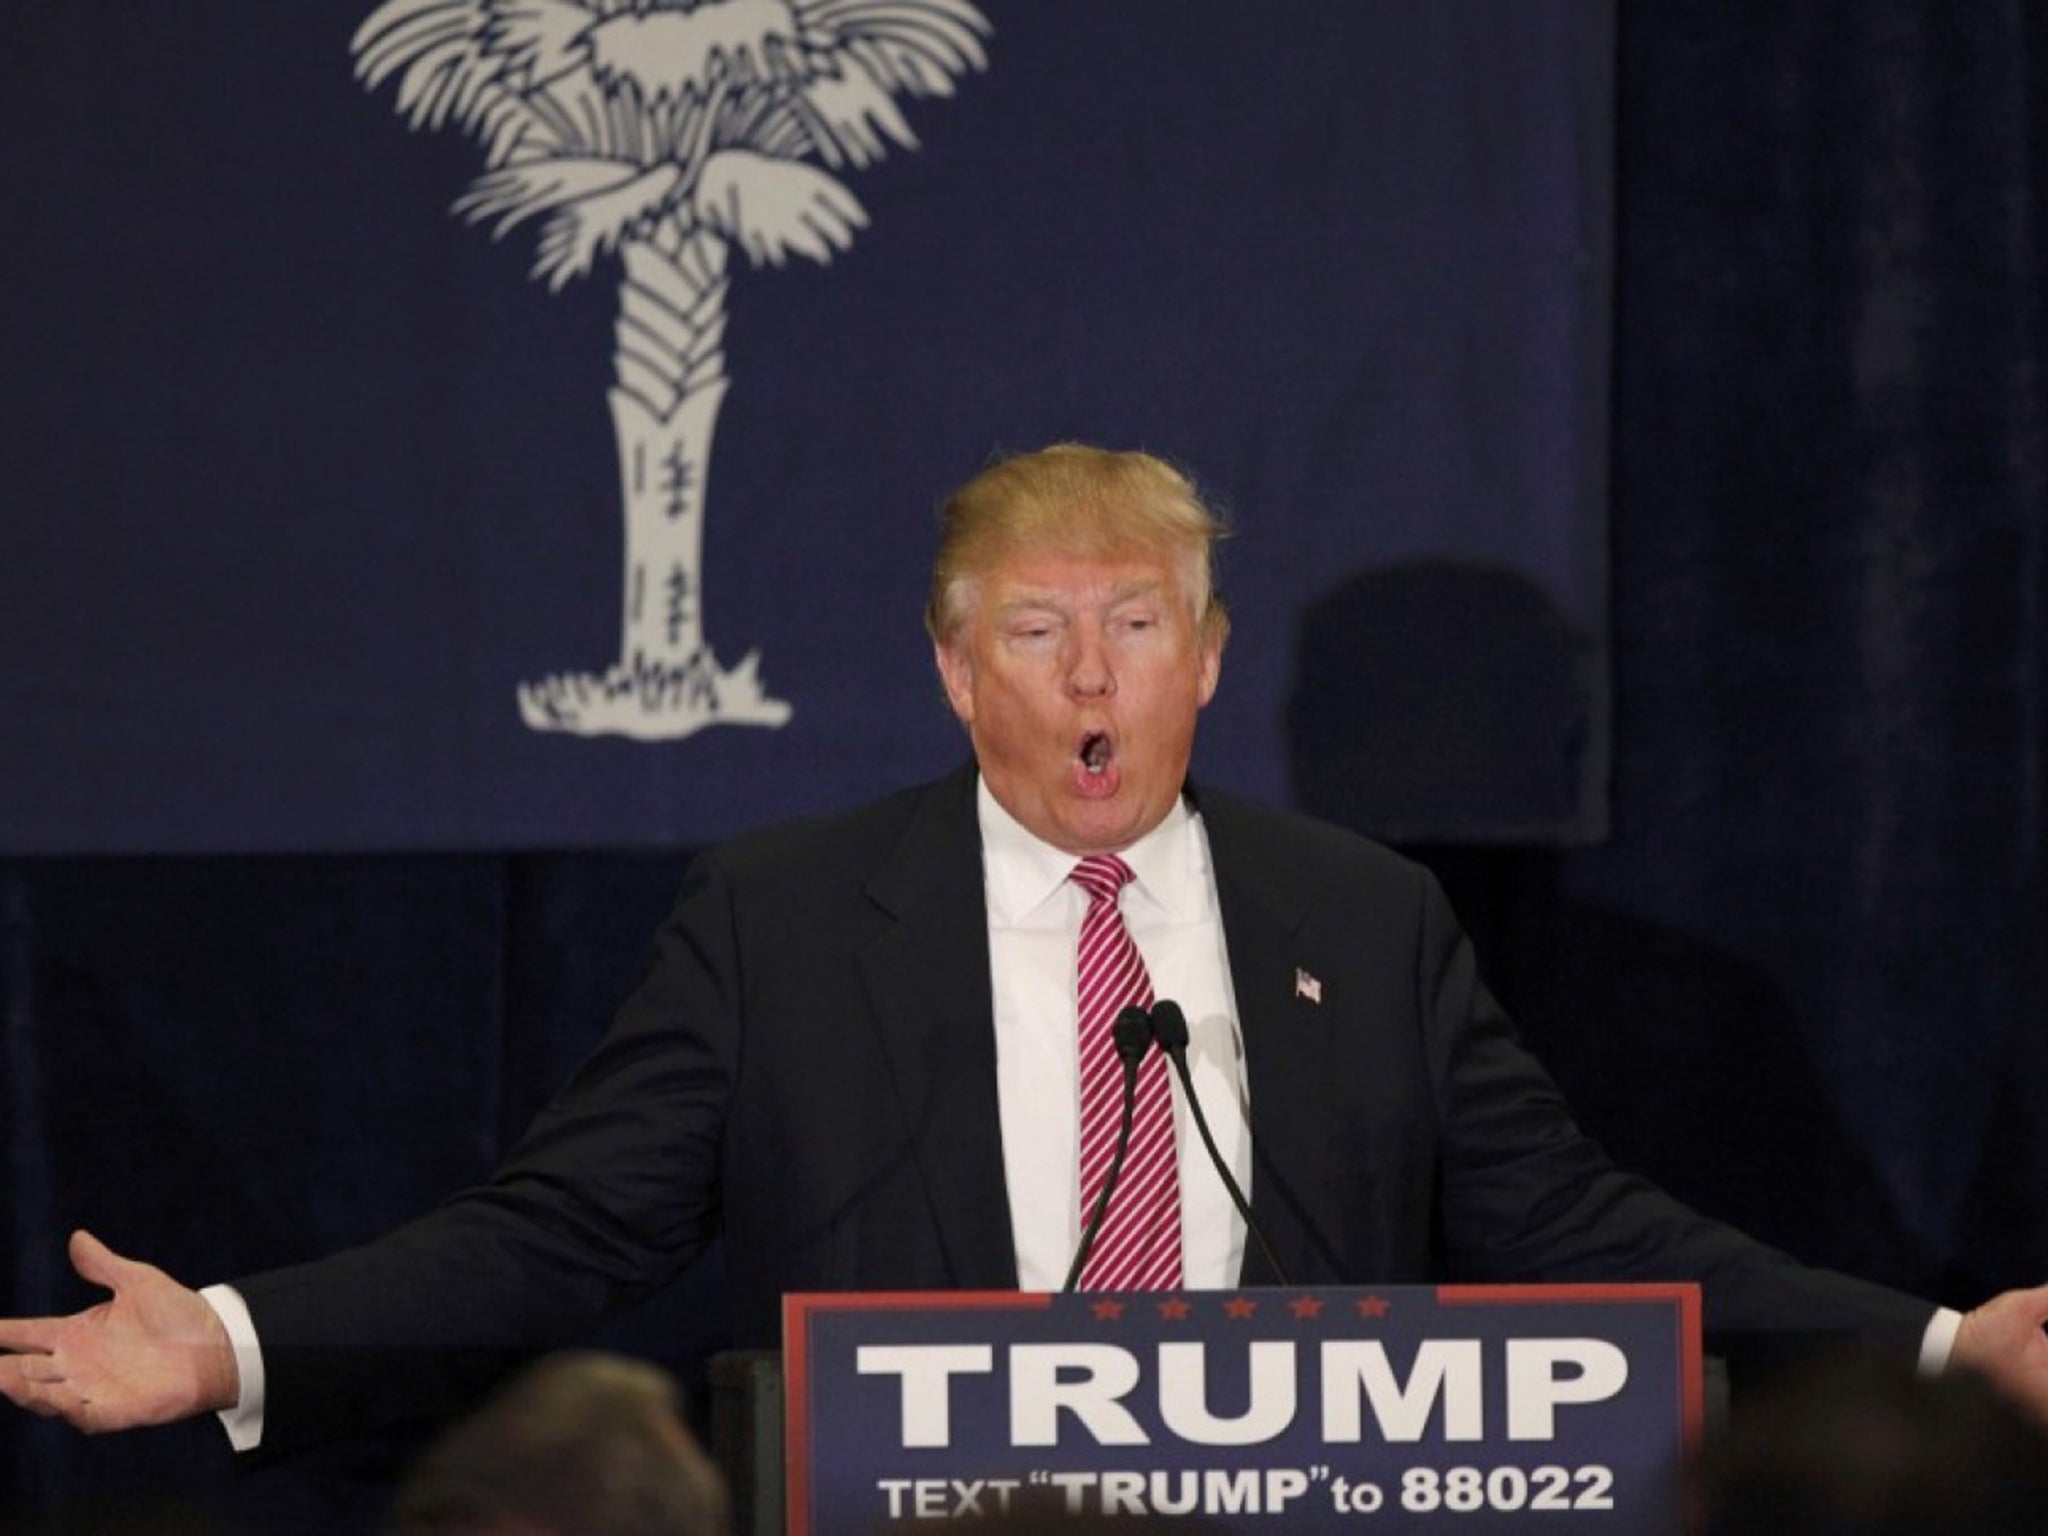 Donald Trump speaks at a campaign town hall meeting in Mount Pleasant, South Carolina, in February